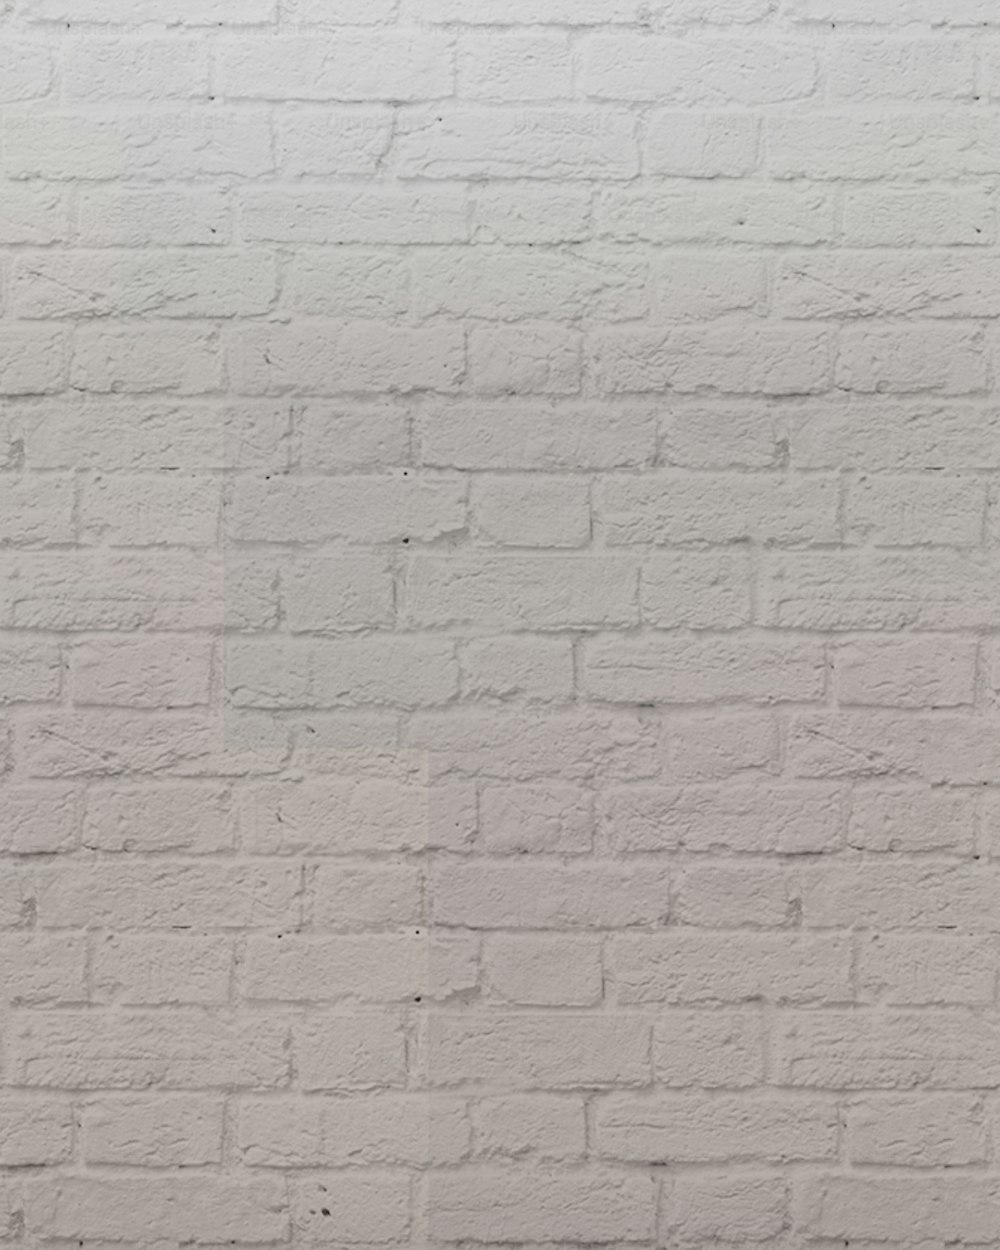 a white brick wall with a black cat sitting on top of it